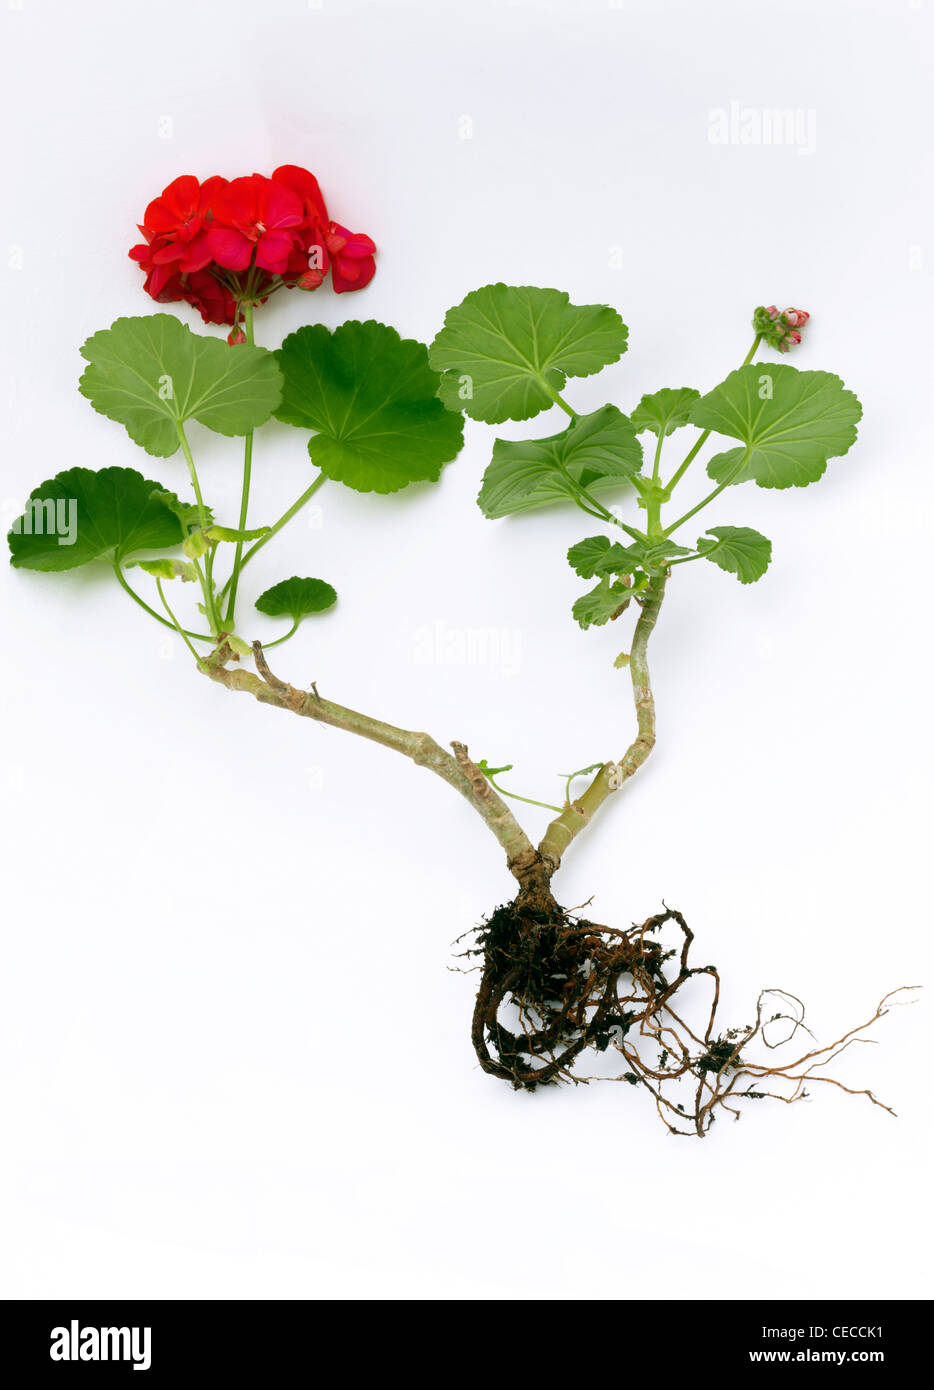 Red Geranium Showing Roots Stock Photo